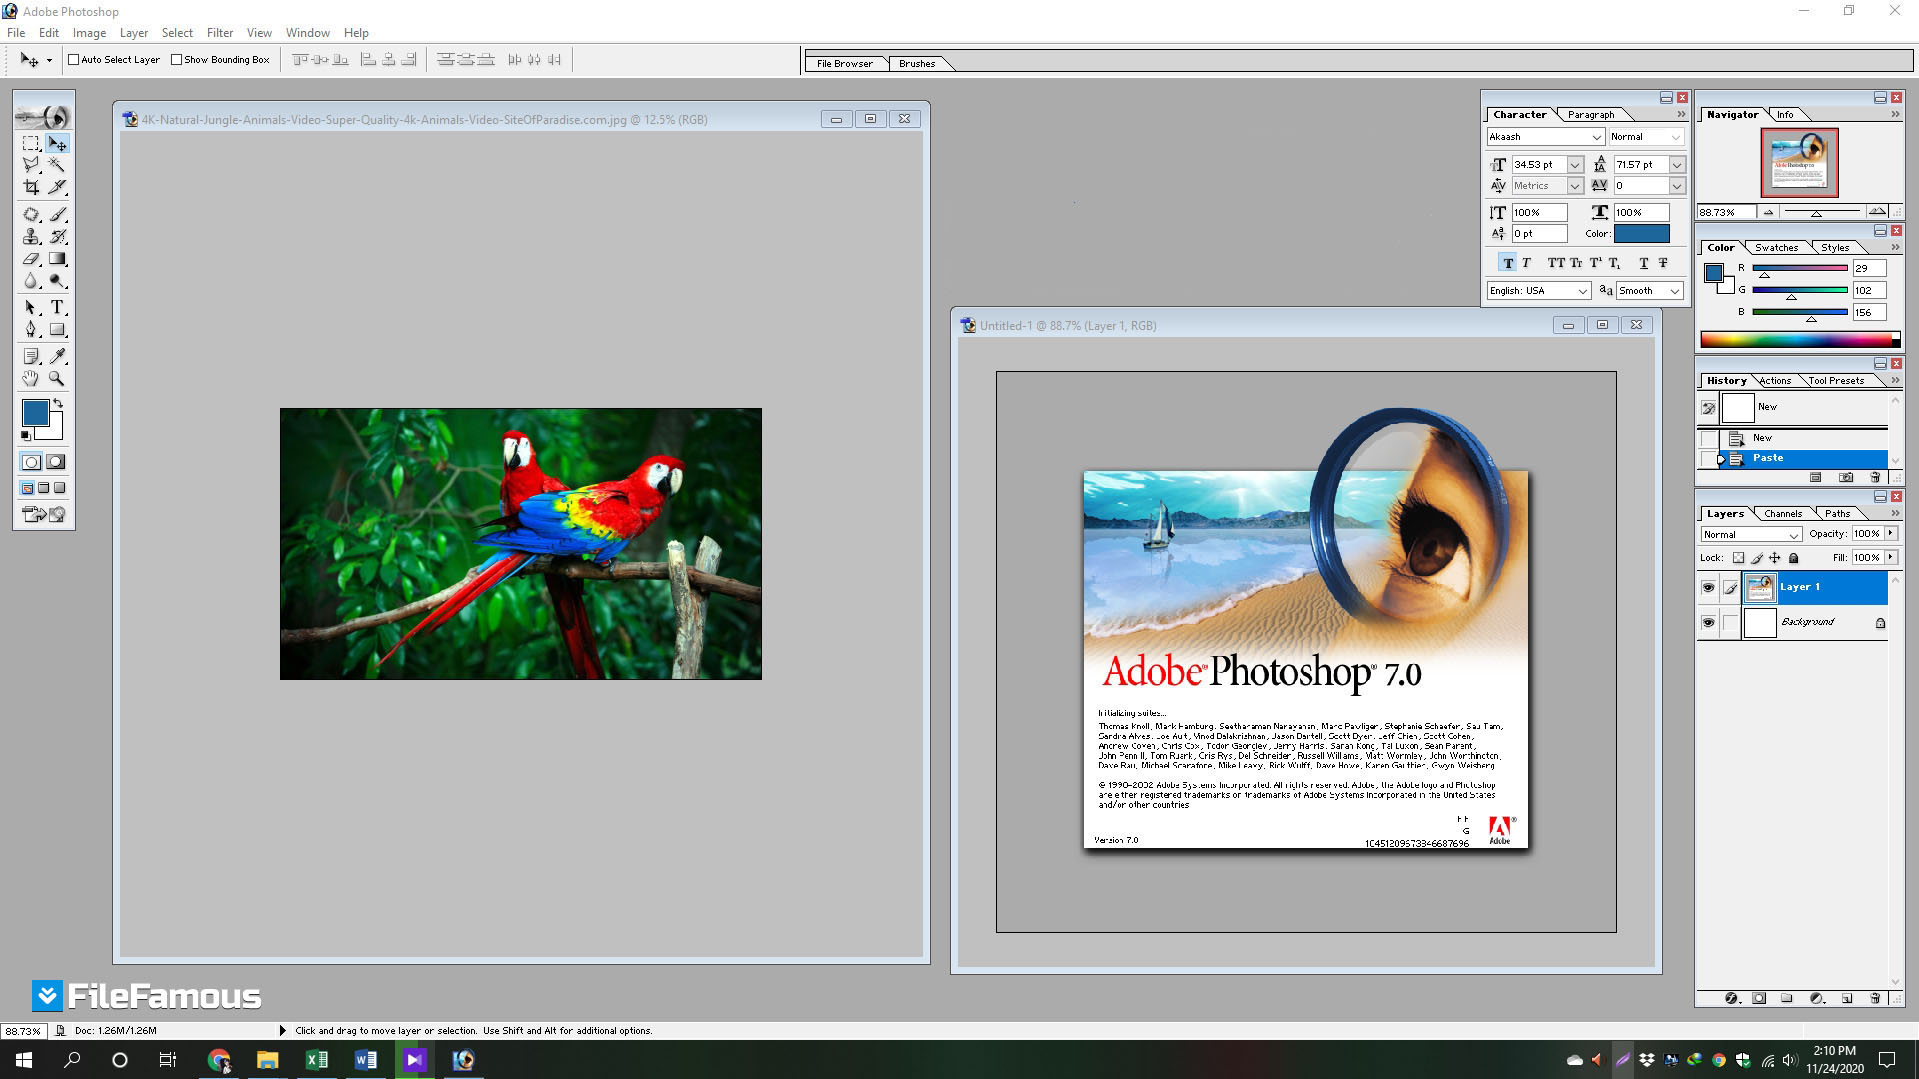 adobe photoshop 7.0 download for windows